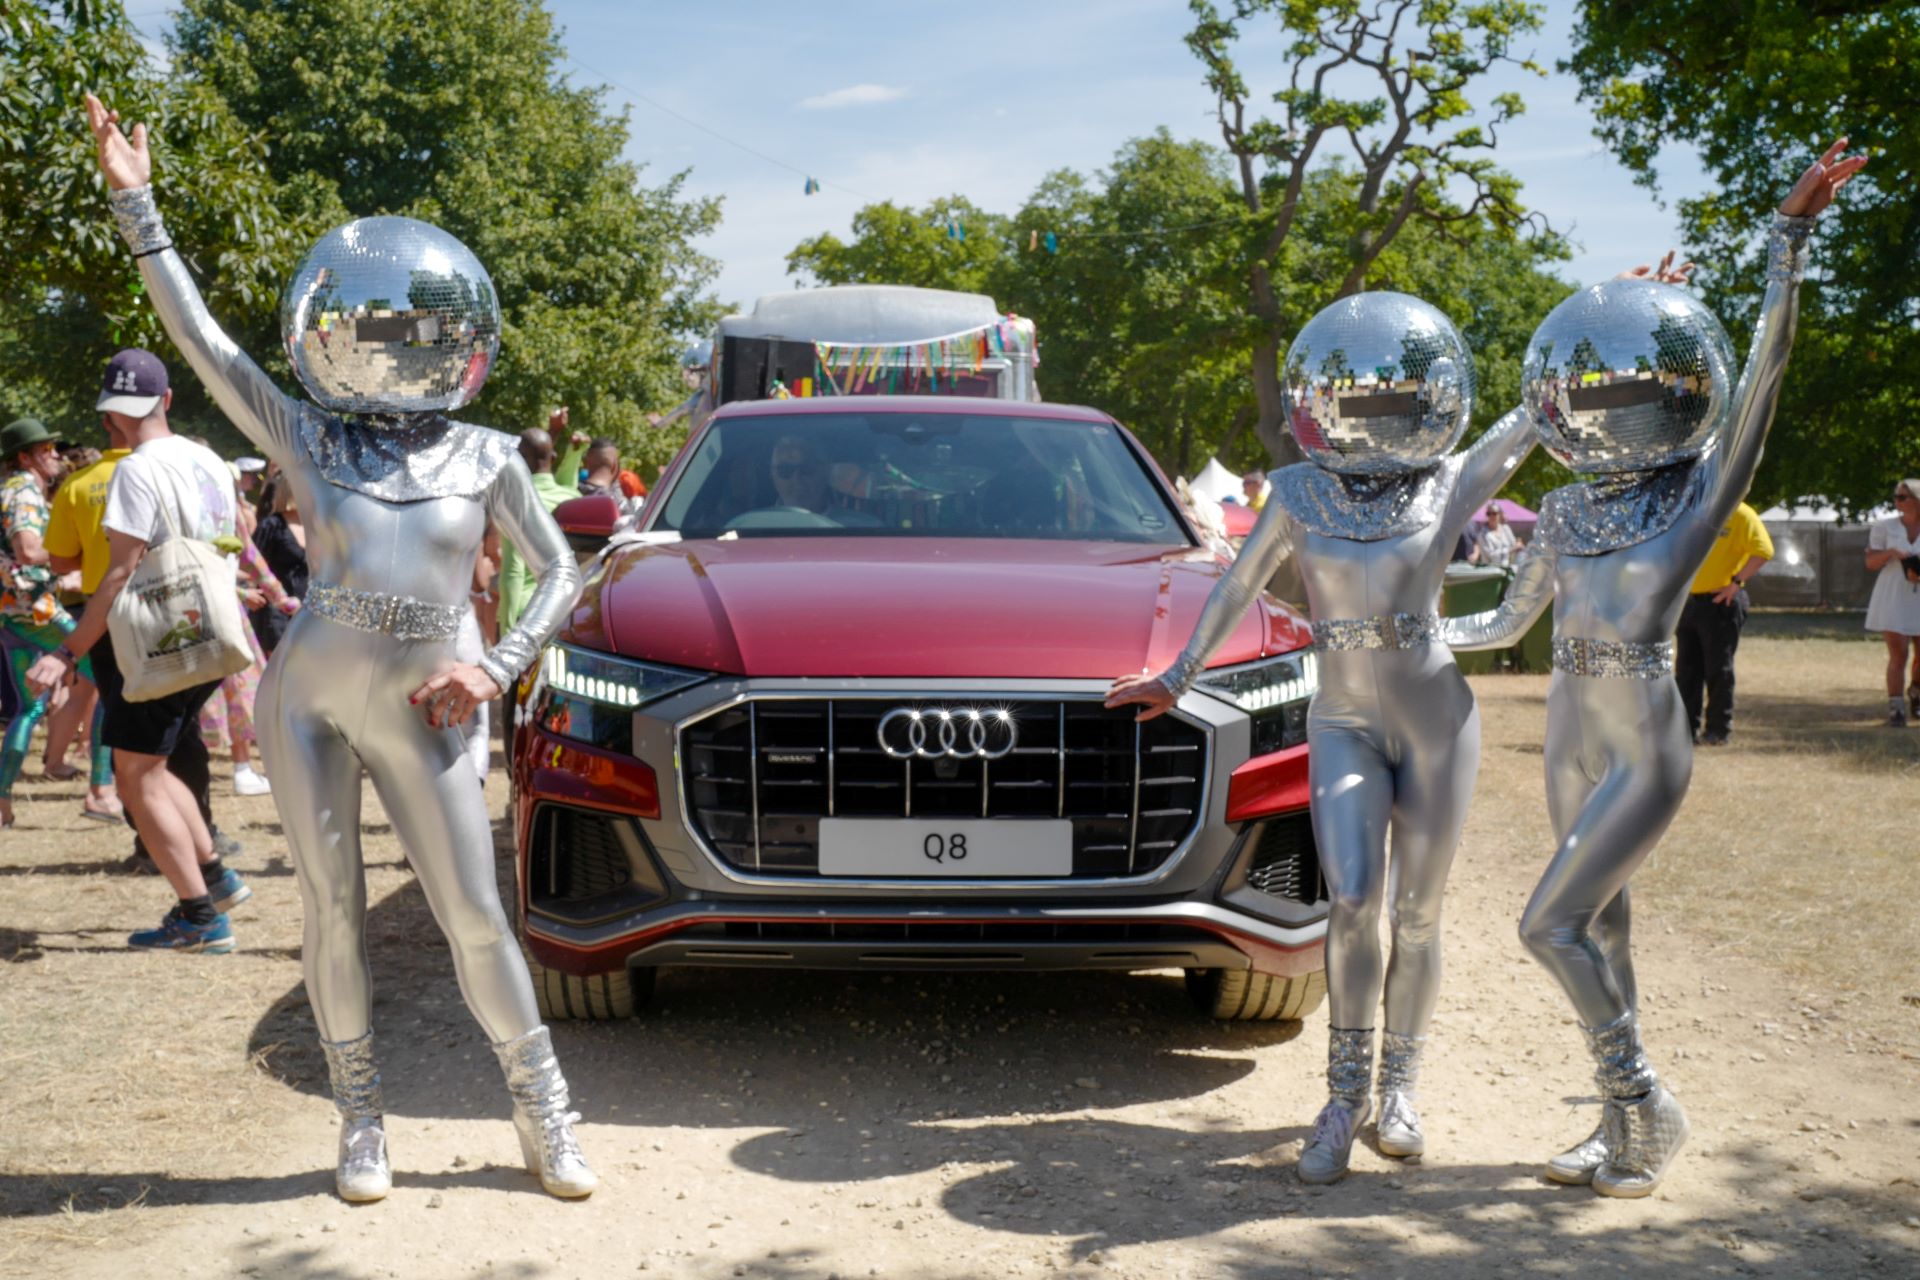 Audi goes proudly into the wilderness: Audi presents Wilderness as the first-ever headline partner